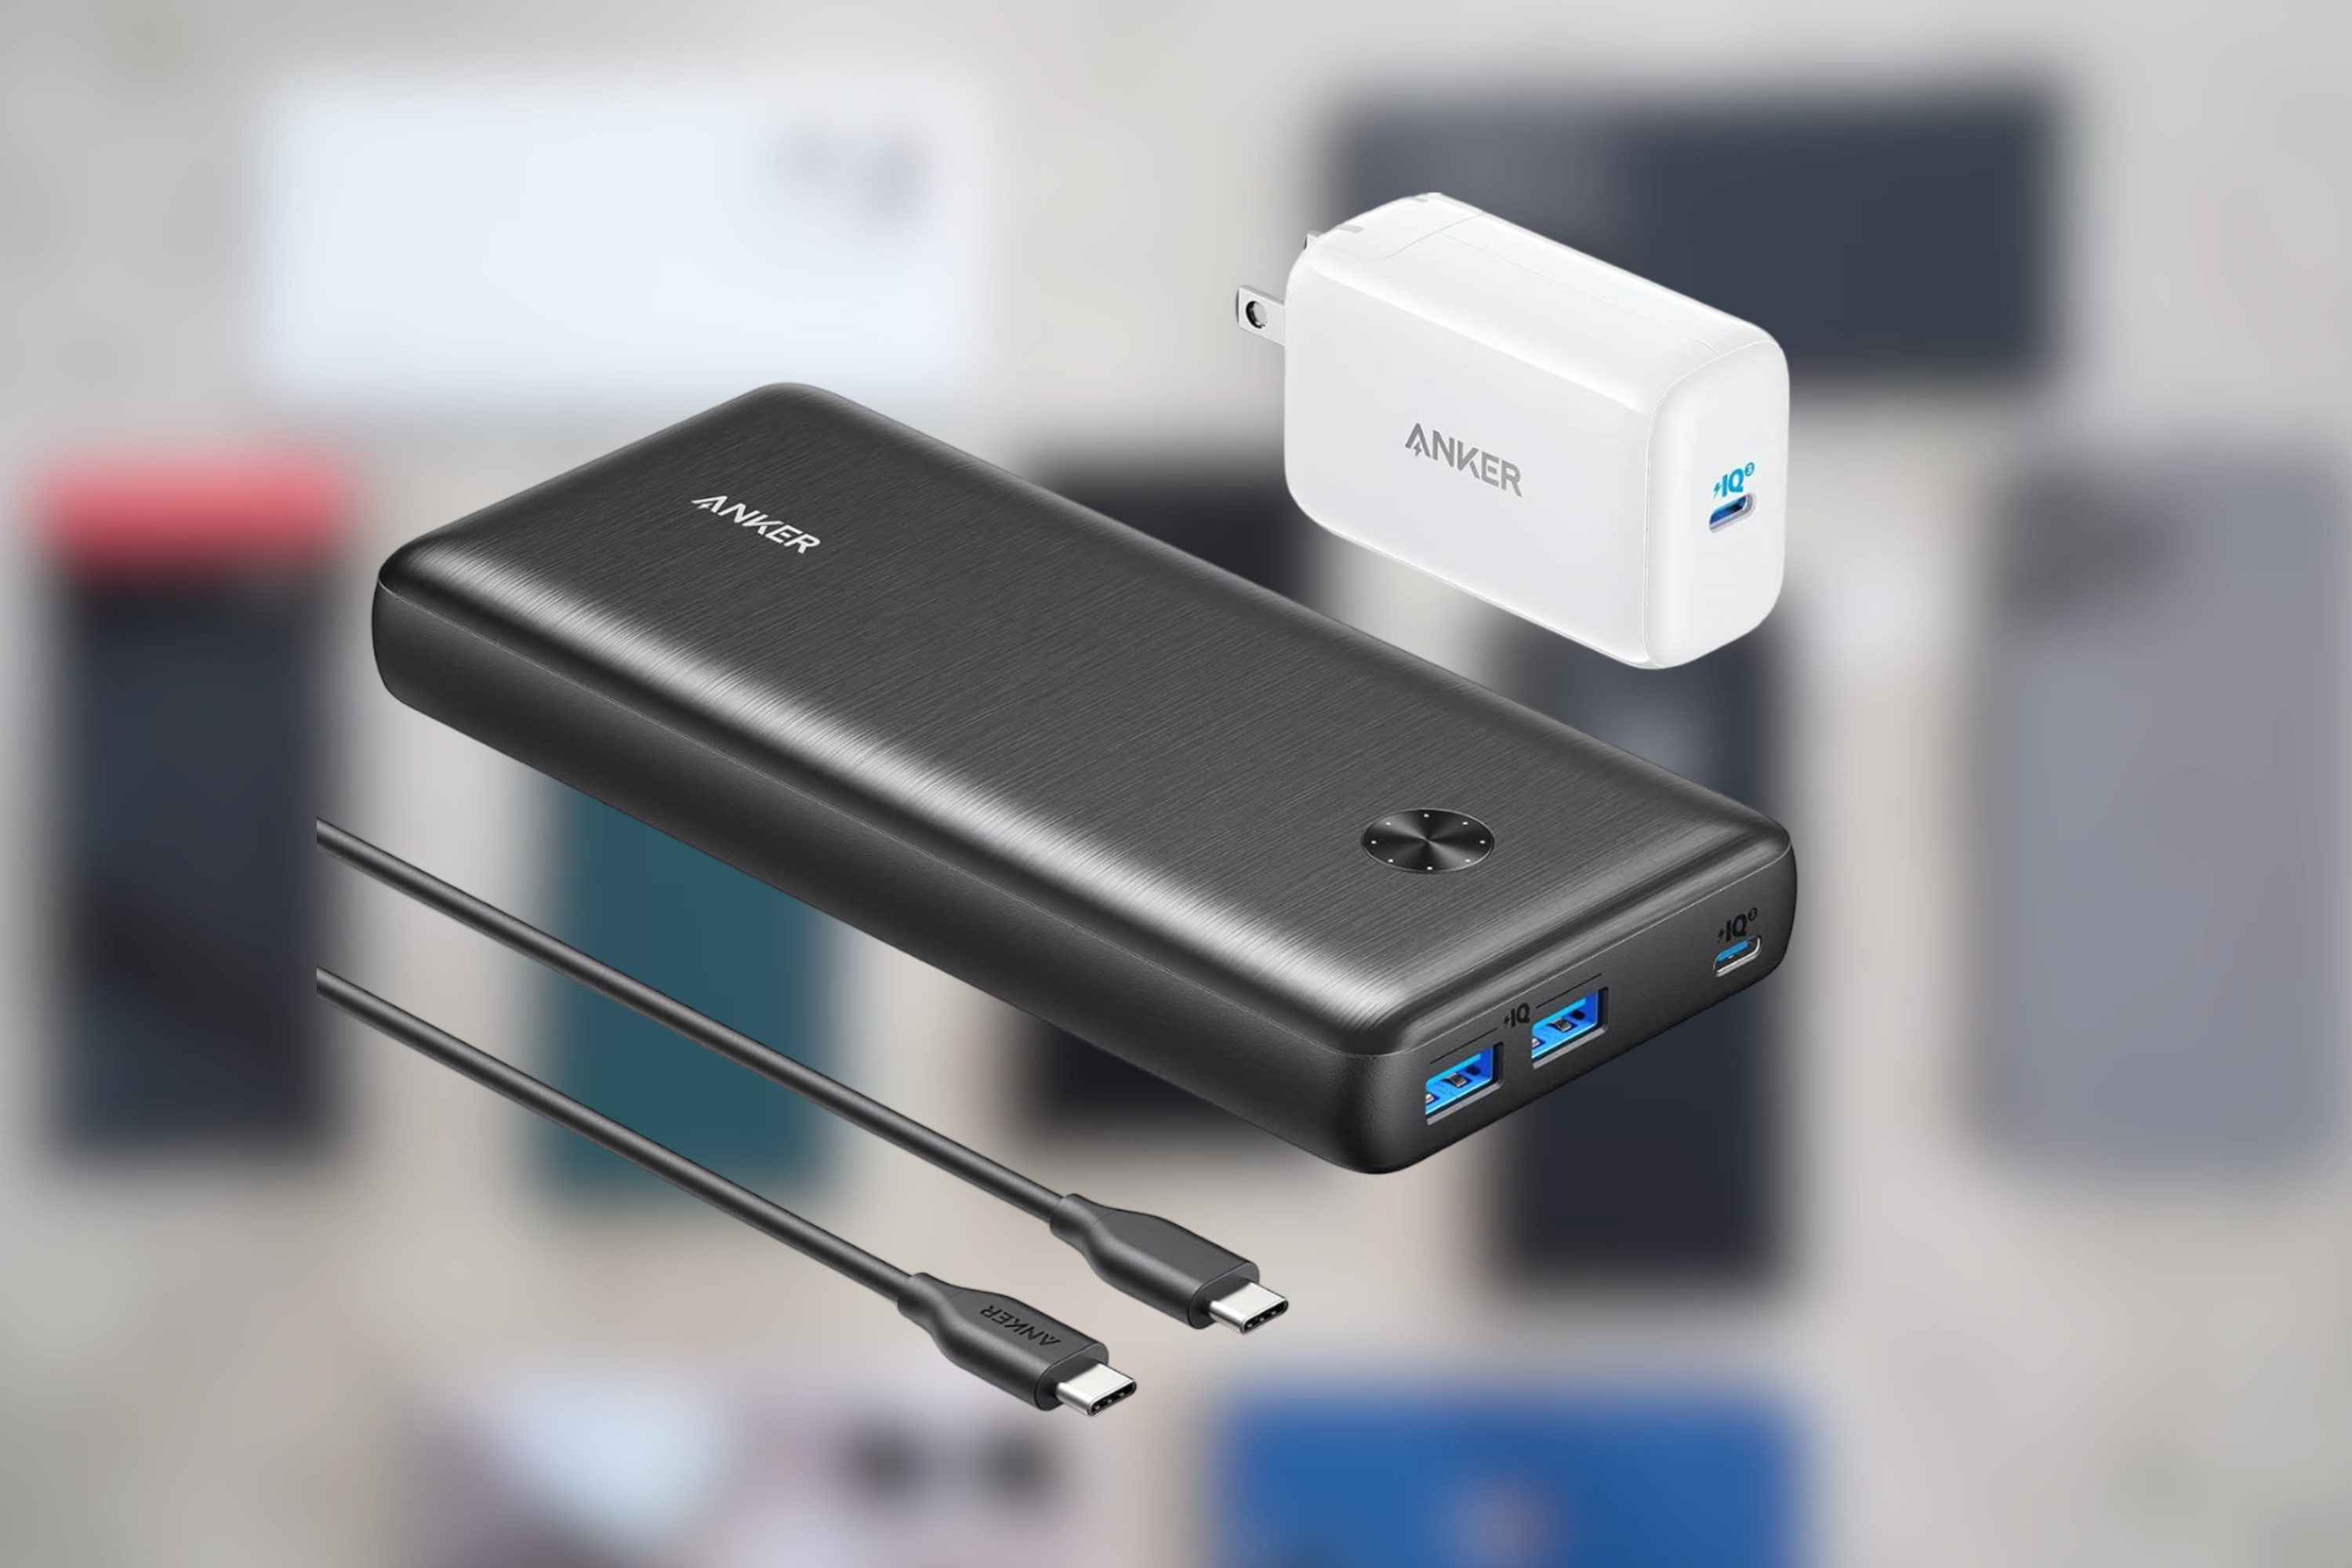 Anker Portable Charger, 737 Power Bank (PowerCore III Elite 25,600 mAh) Combo with 65W PD Wall Charger